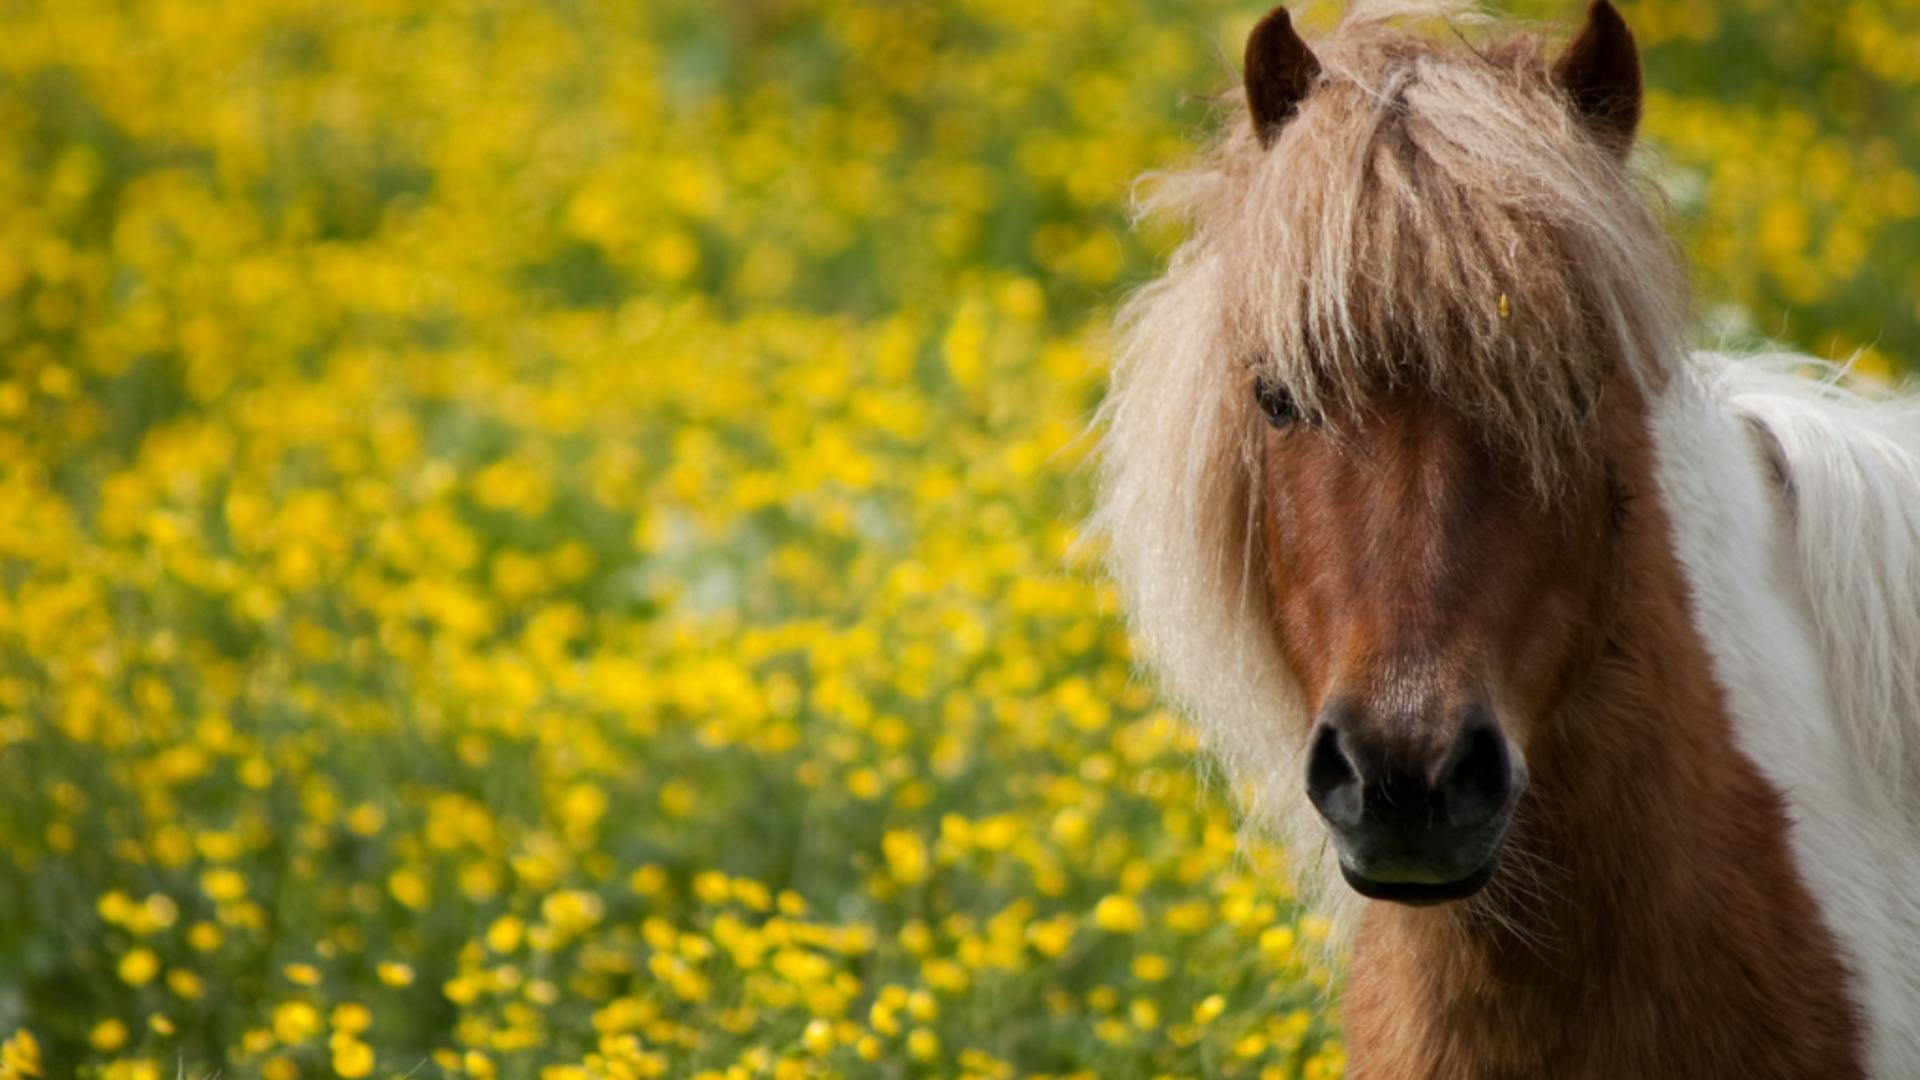 Cute Horses Wallpaper Horse With Long Hair In